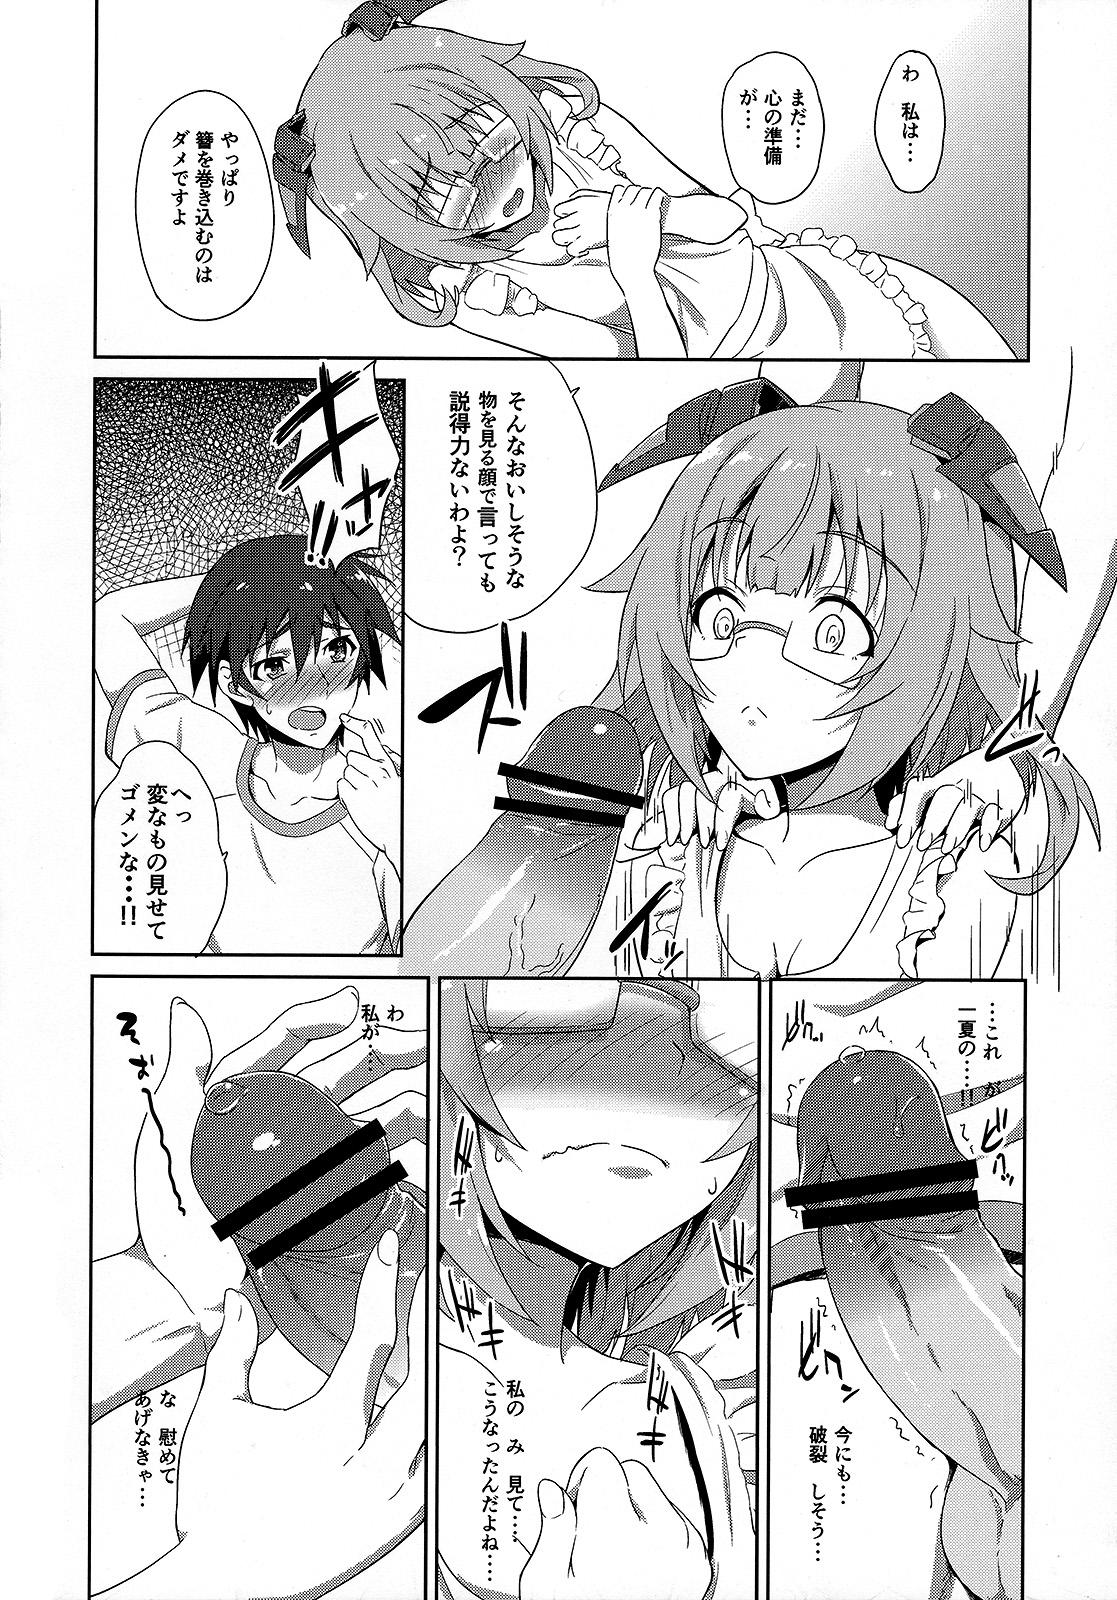 Bitch IS ICHIKA LOVE SISTERS!! - Infinite stratos Hairy - Page 7